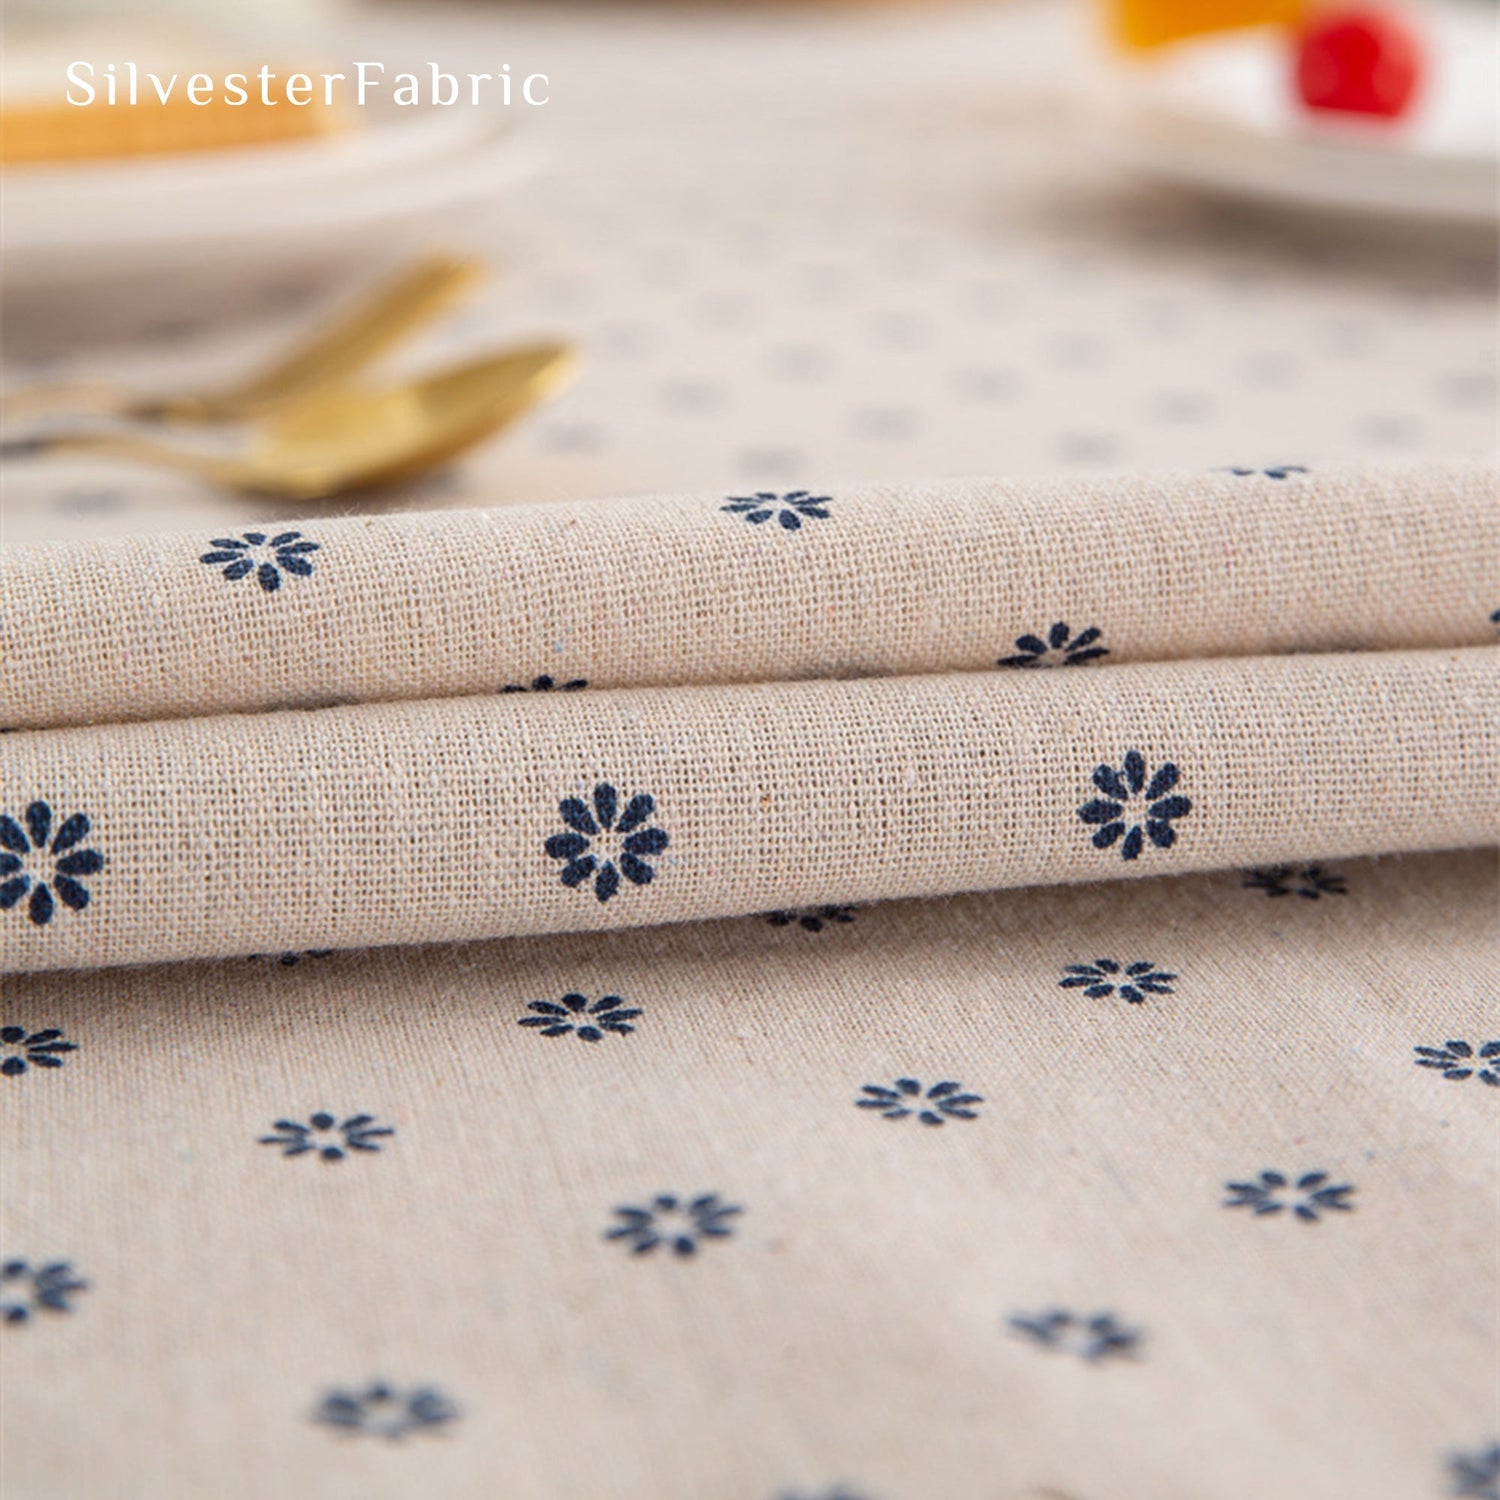 Buy Premium Tablecloth Online At Best Prices - Silvester Fabric